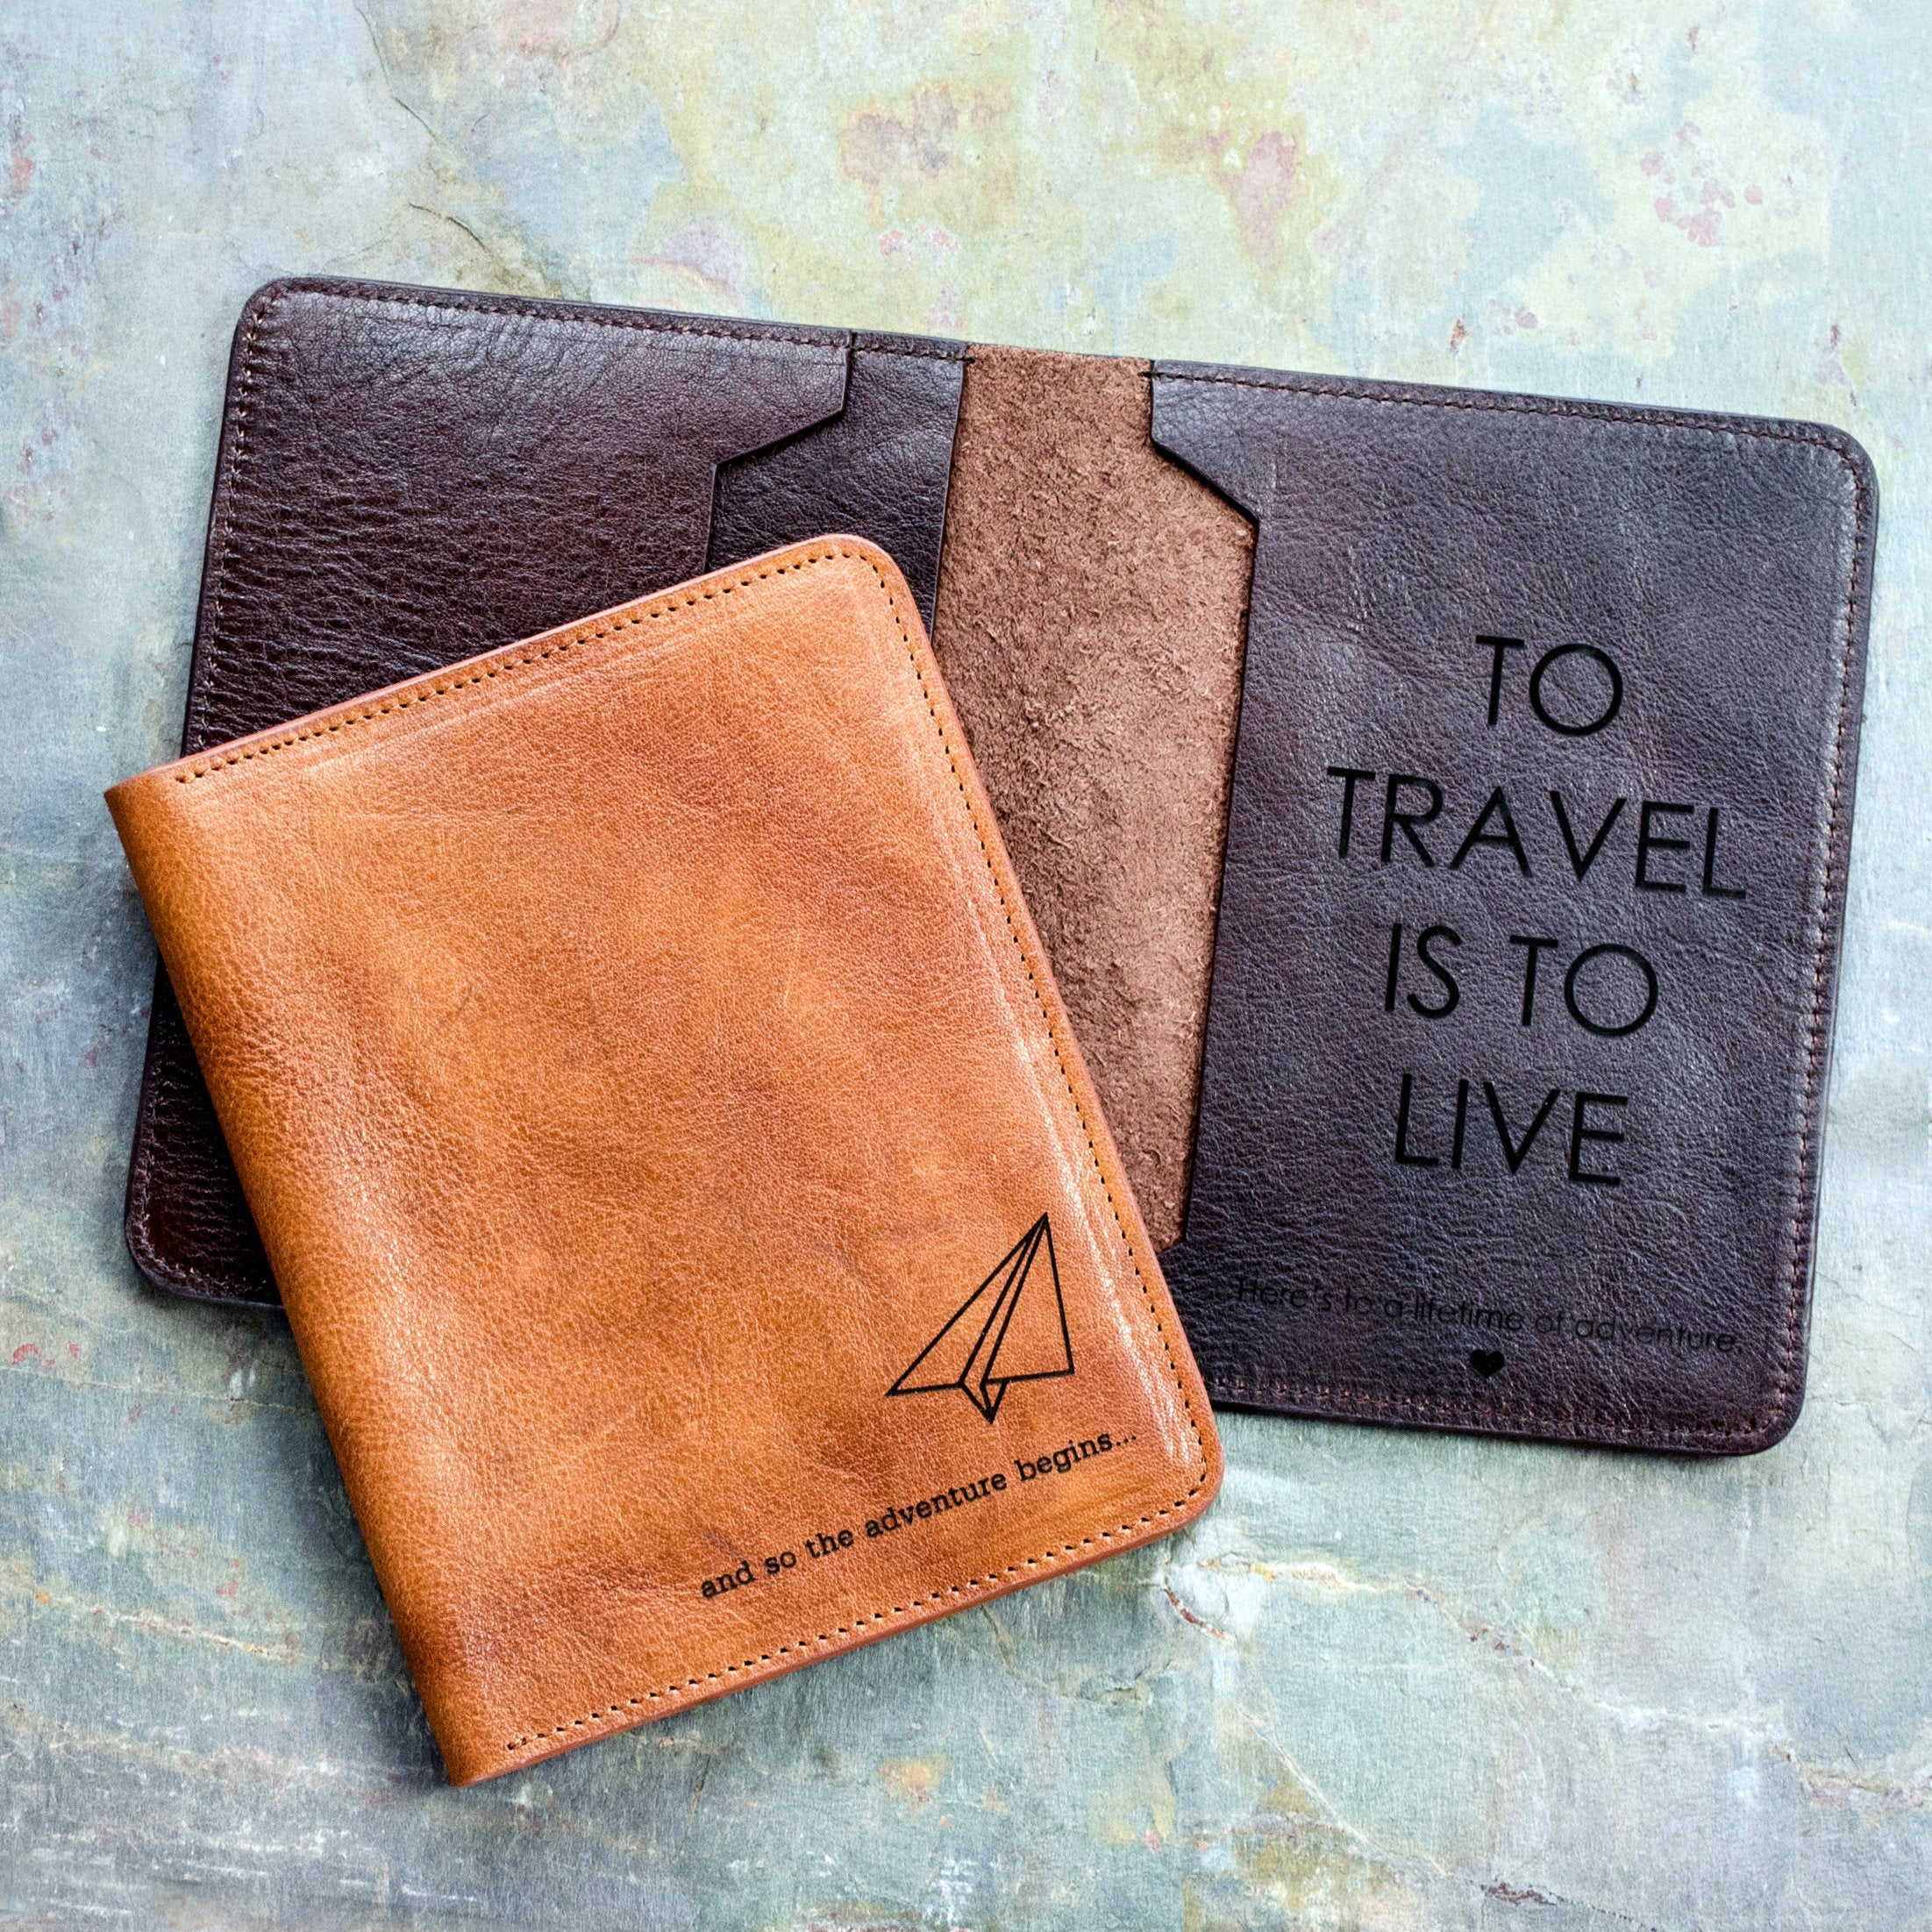 Personalized Passport Cover and Luggage Tag Set Leather 